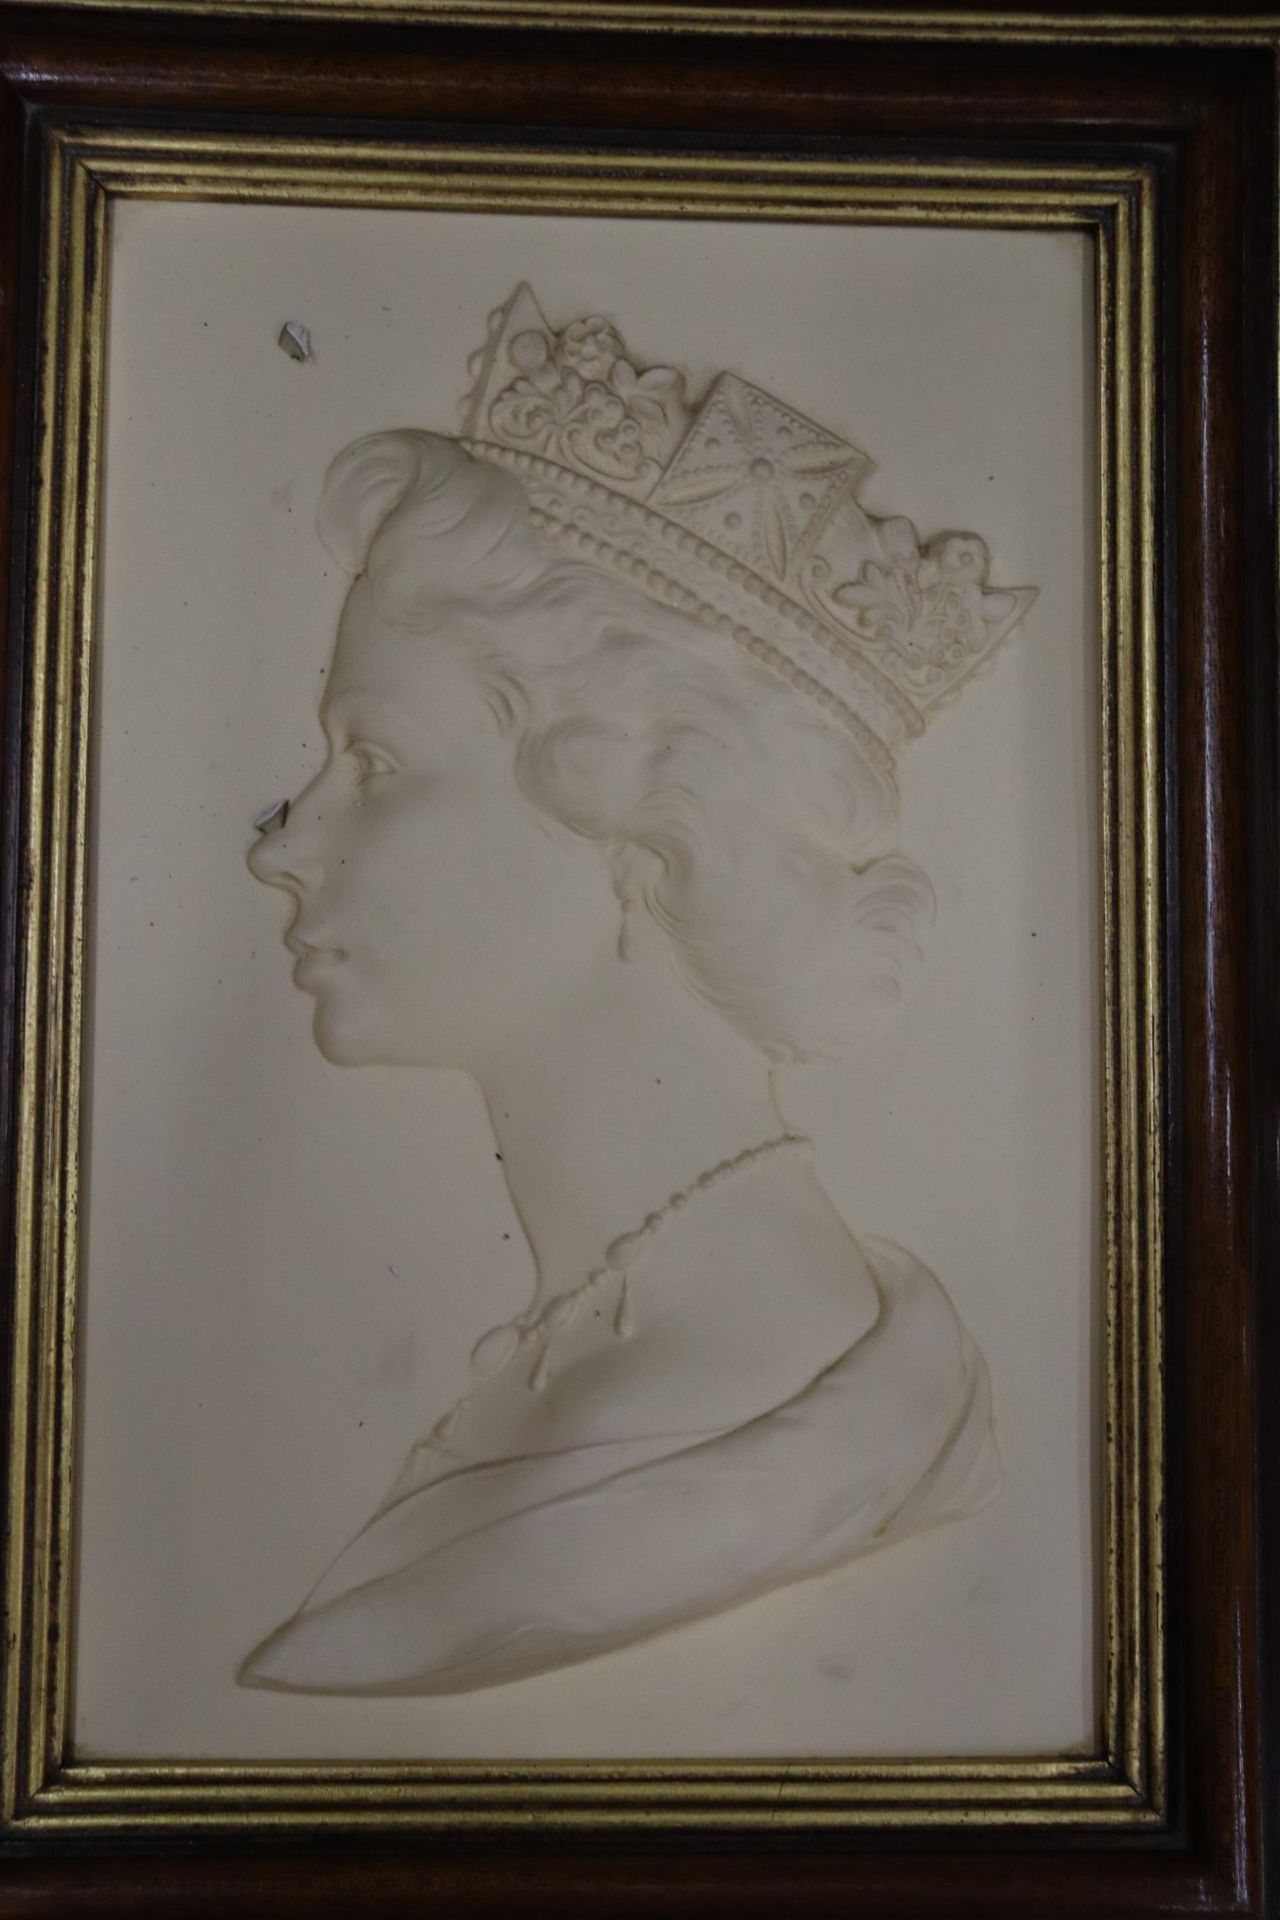 A FRAMED LIMITED EDITION ROYAL WORCESTER PLAQUE PORTRAIT OF HER MAJESTY THE QUEEN ELIZABETH II - Image 5 of 5